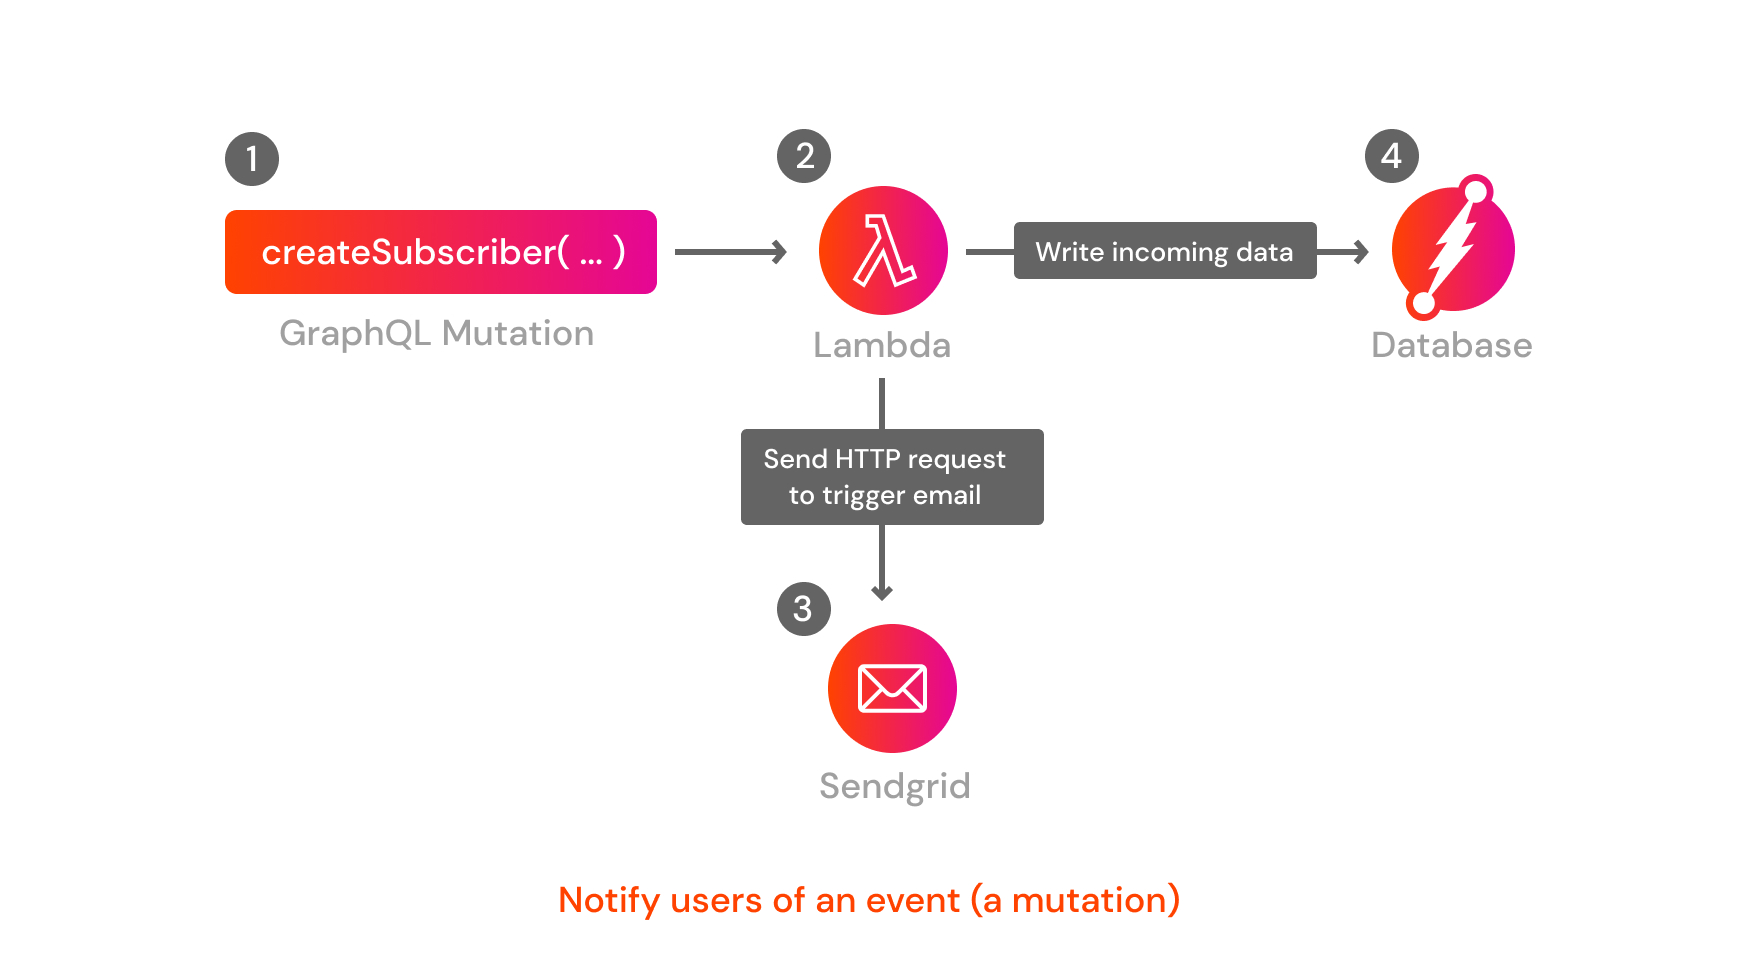 Notify users of an event